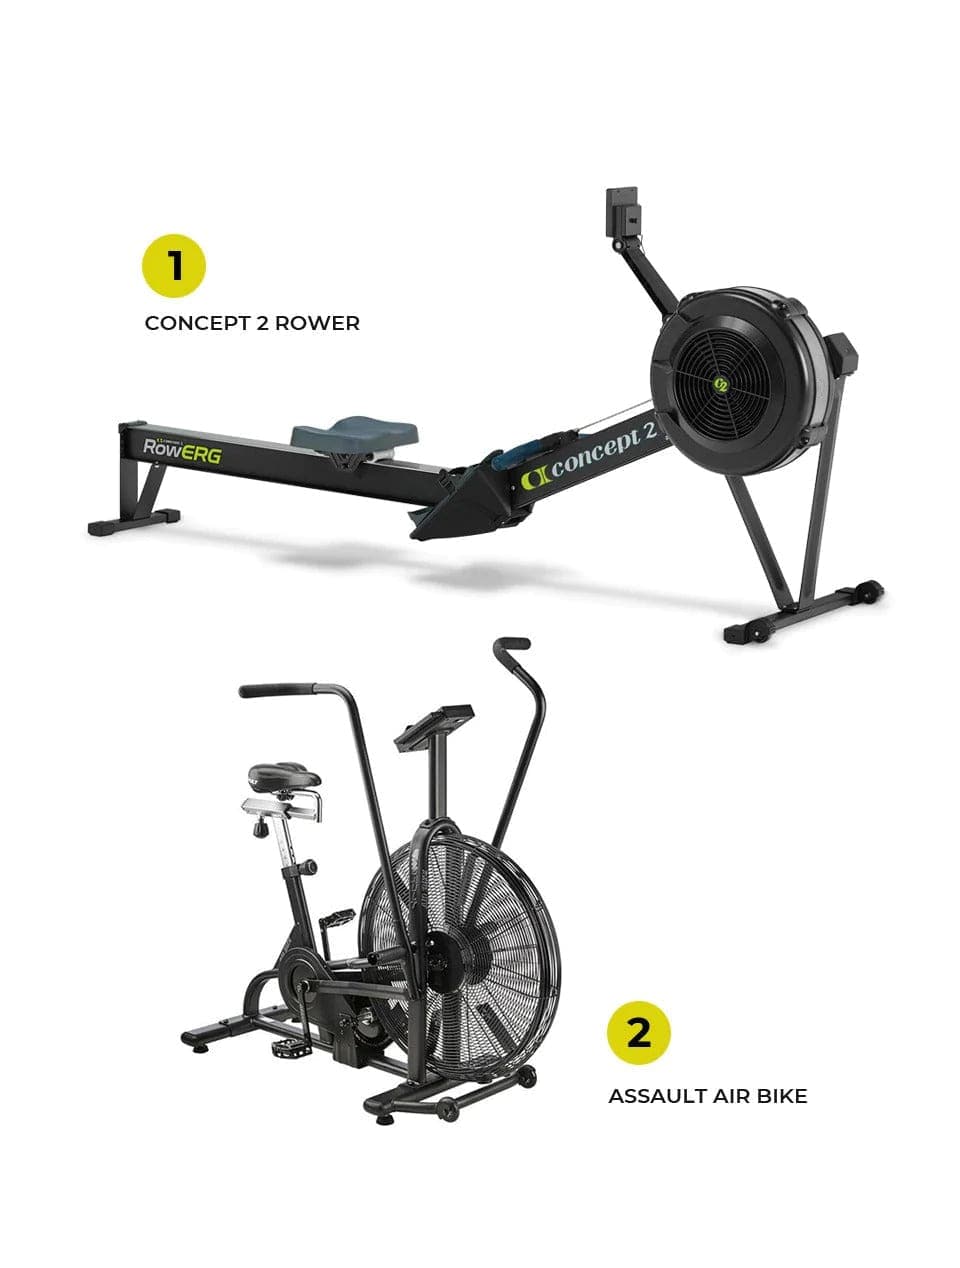 Combo Offer Assault Air Bike + Concept 2 Rower with PM 5 Monitor - Athletix.ae